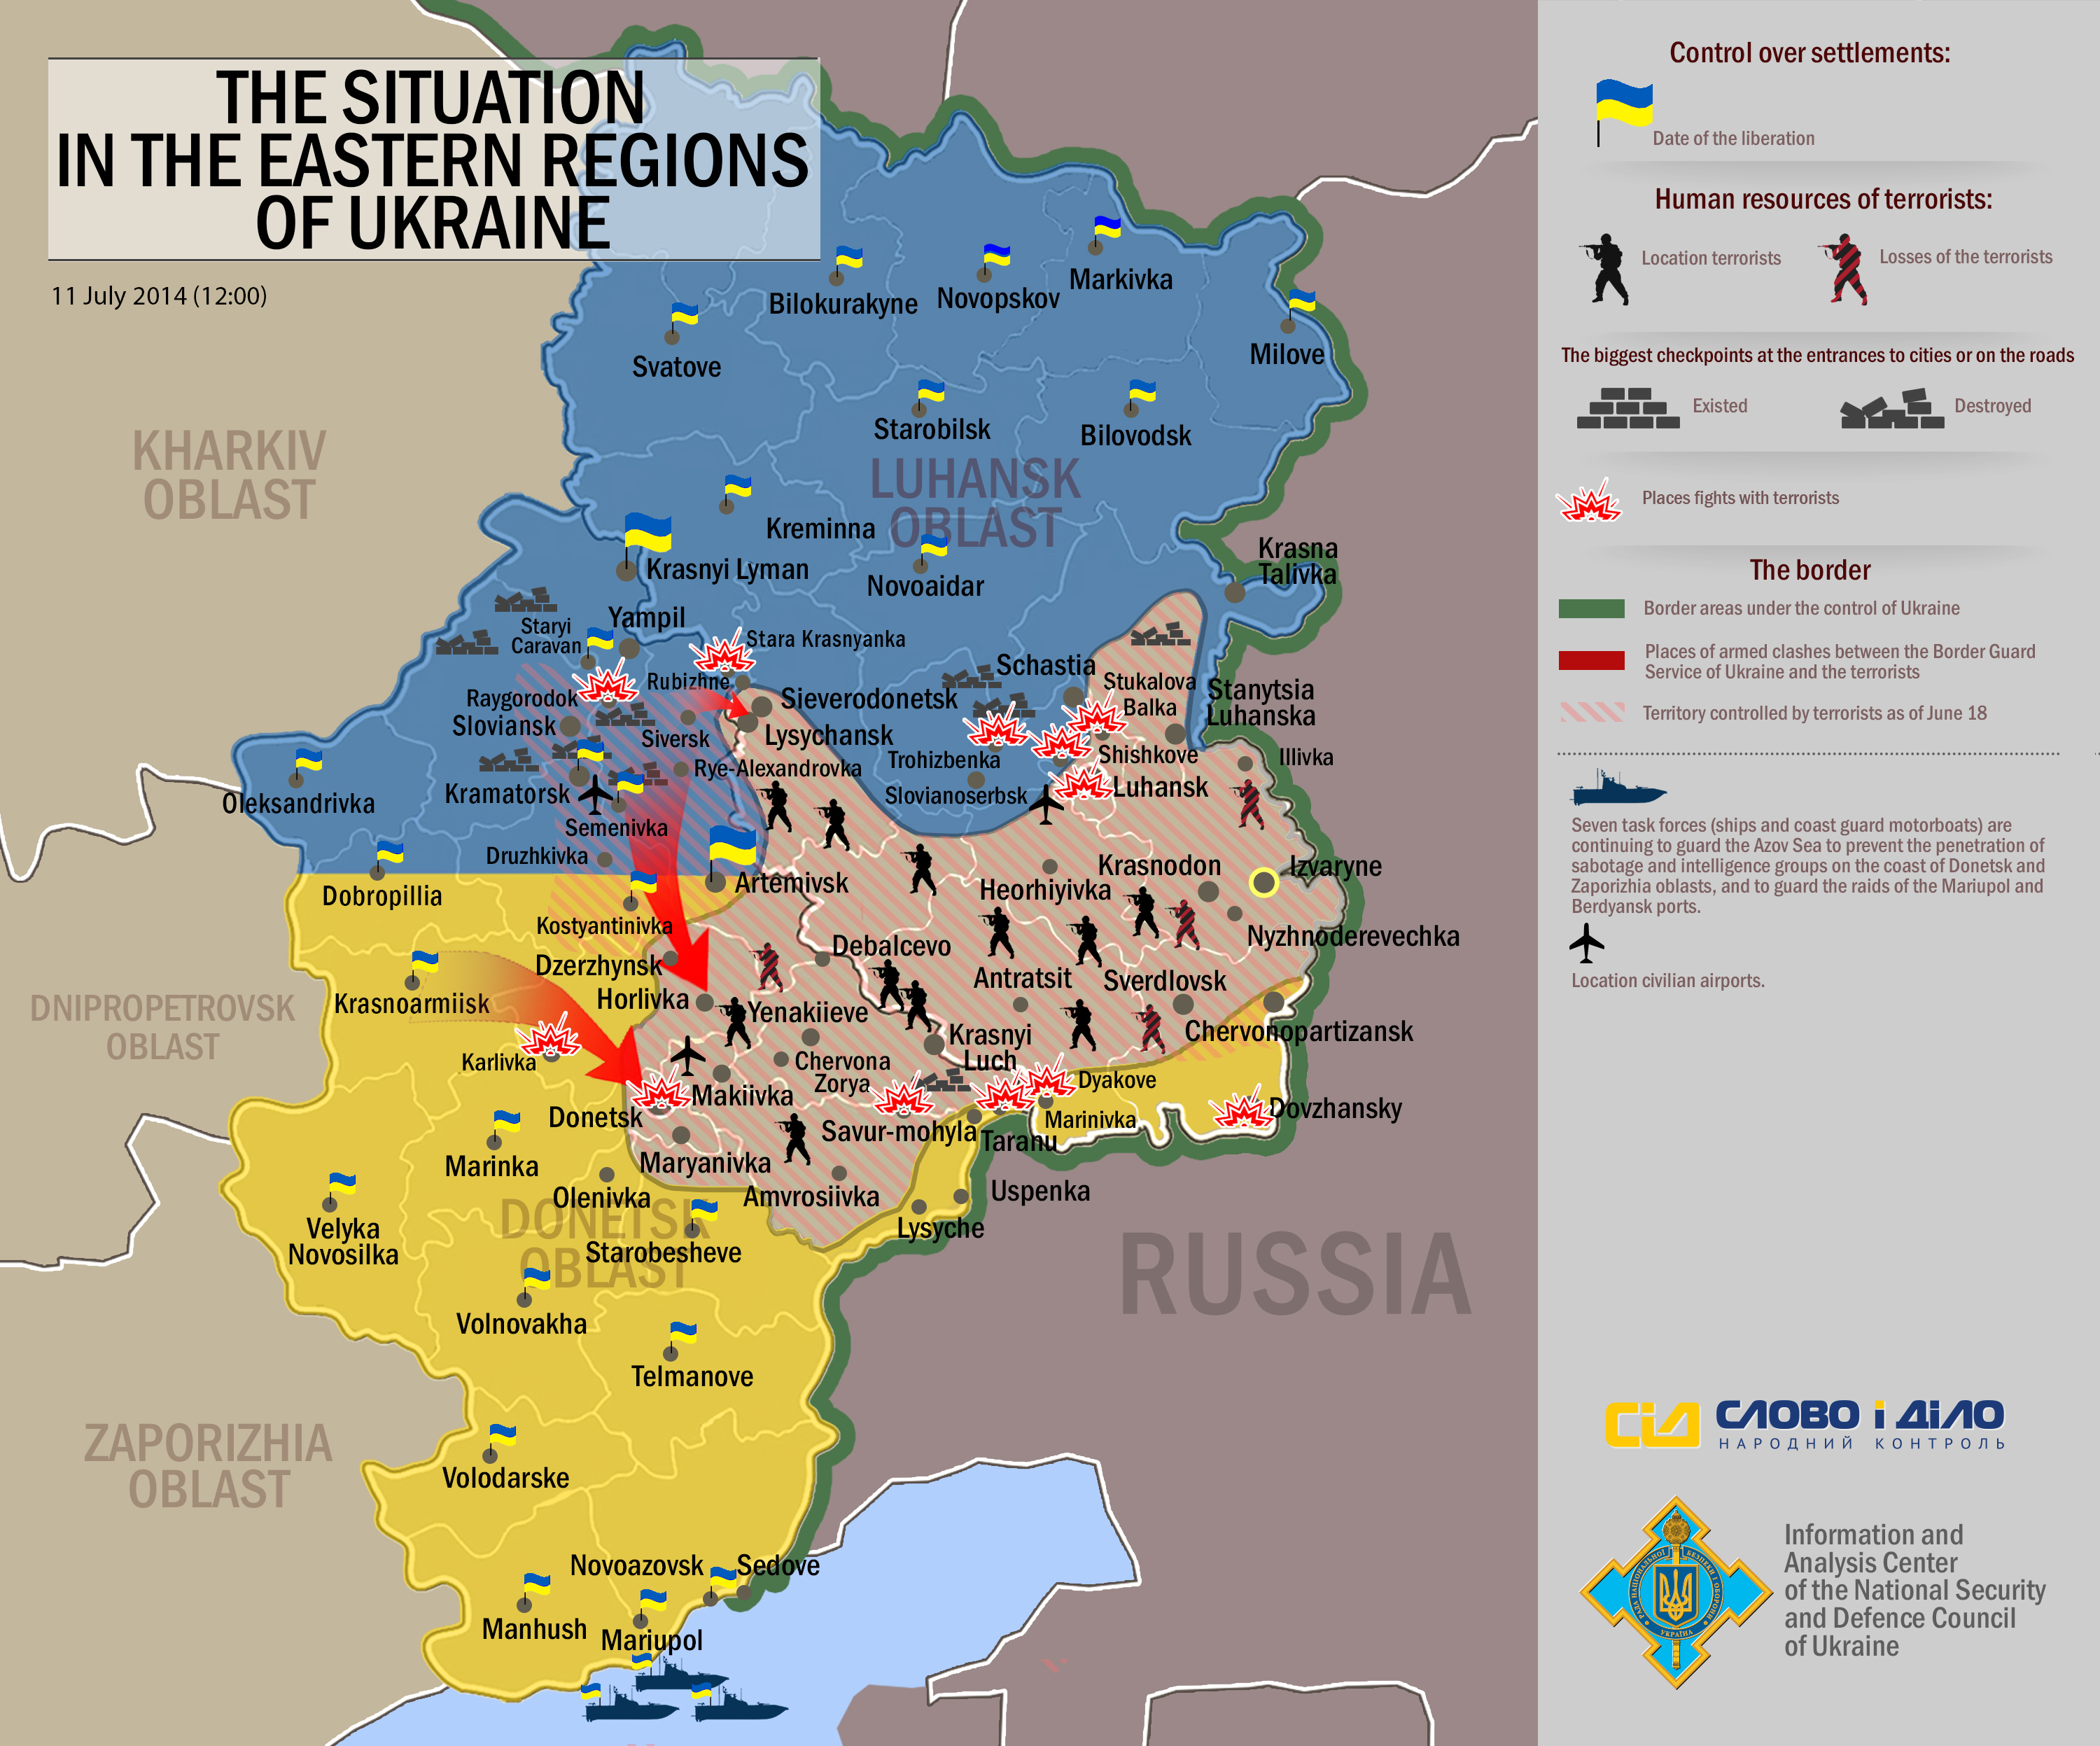 The situation in the eastern regions of Ukraine on 11 July 2014. Image courtesy of the National Security and Defense Council of Ukraine.